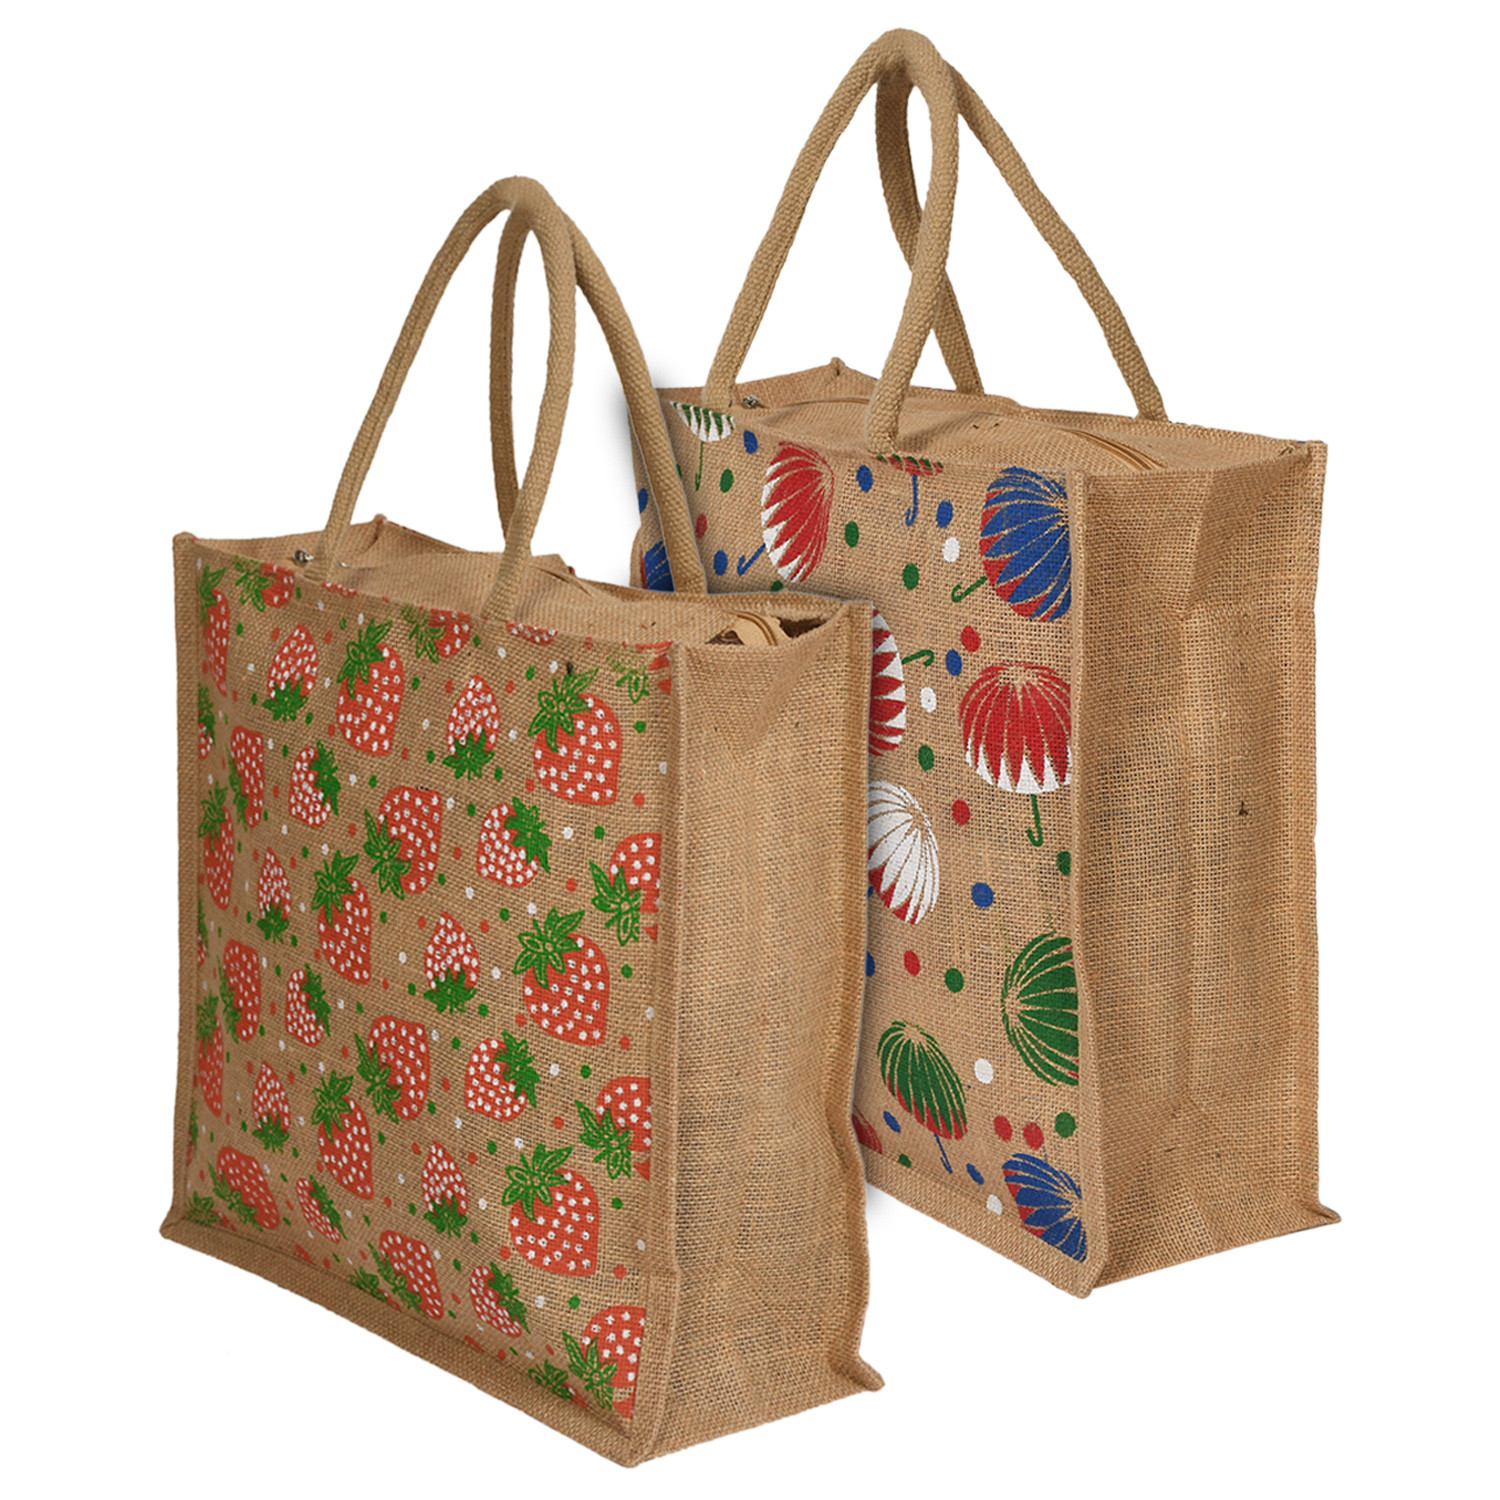 Kuber Industries Umbrella Print and Strawberry Print Jute Reusable Eco-Friendly Hand Bag/Grocery Bag For Man, Woman With Handle Pack of 2 (Brown) 54KM4372